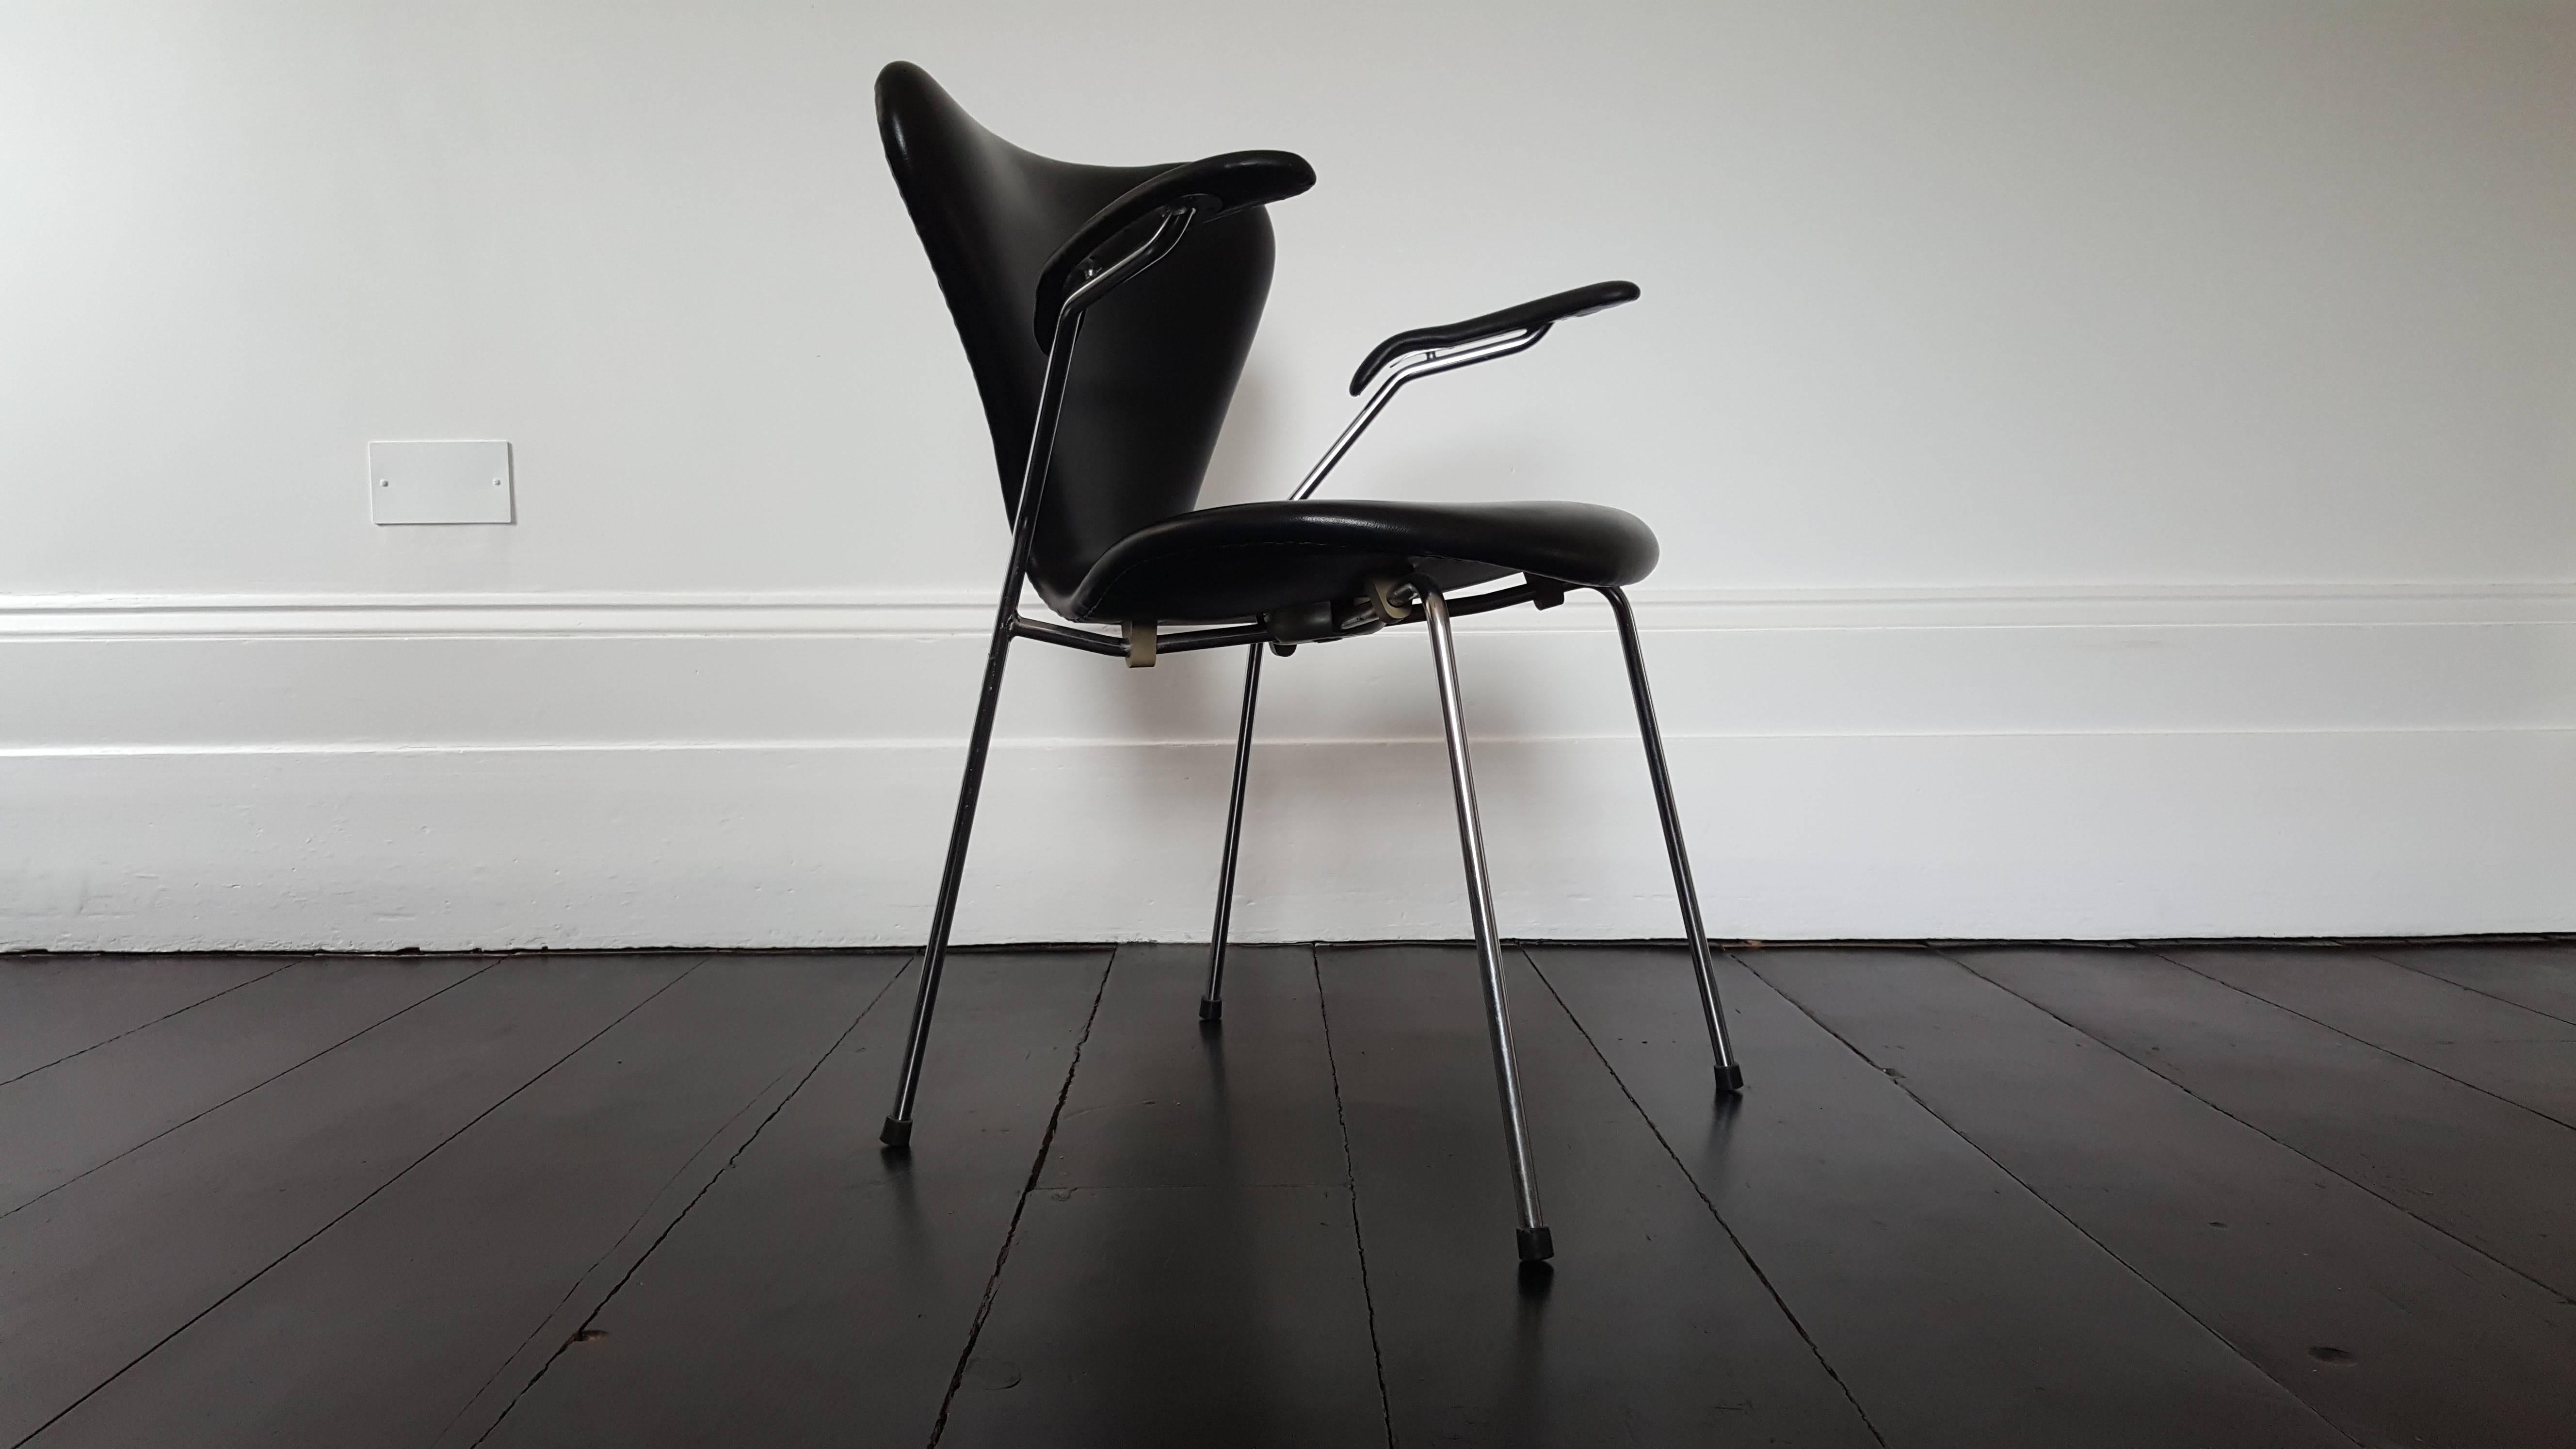 Model 3207 series 7 armchair in faux leather by Arne Jacobsen for Fritz Hansen, produced in 1967

Arne Jacobsen 'series 7' model 3207 armchair in faux leather produced by Fritz Hansen in 1967. Great ergonomic design and one of the most iconic and